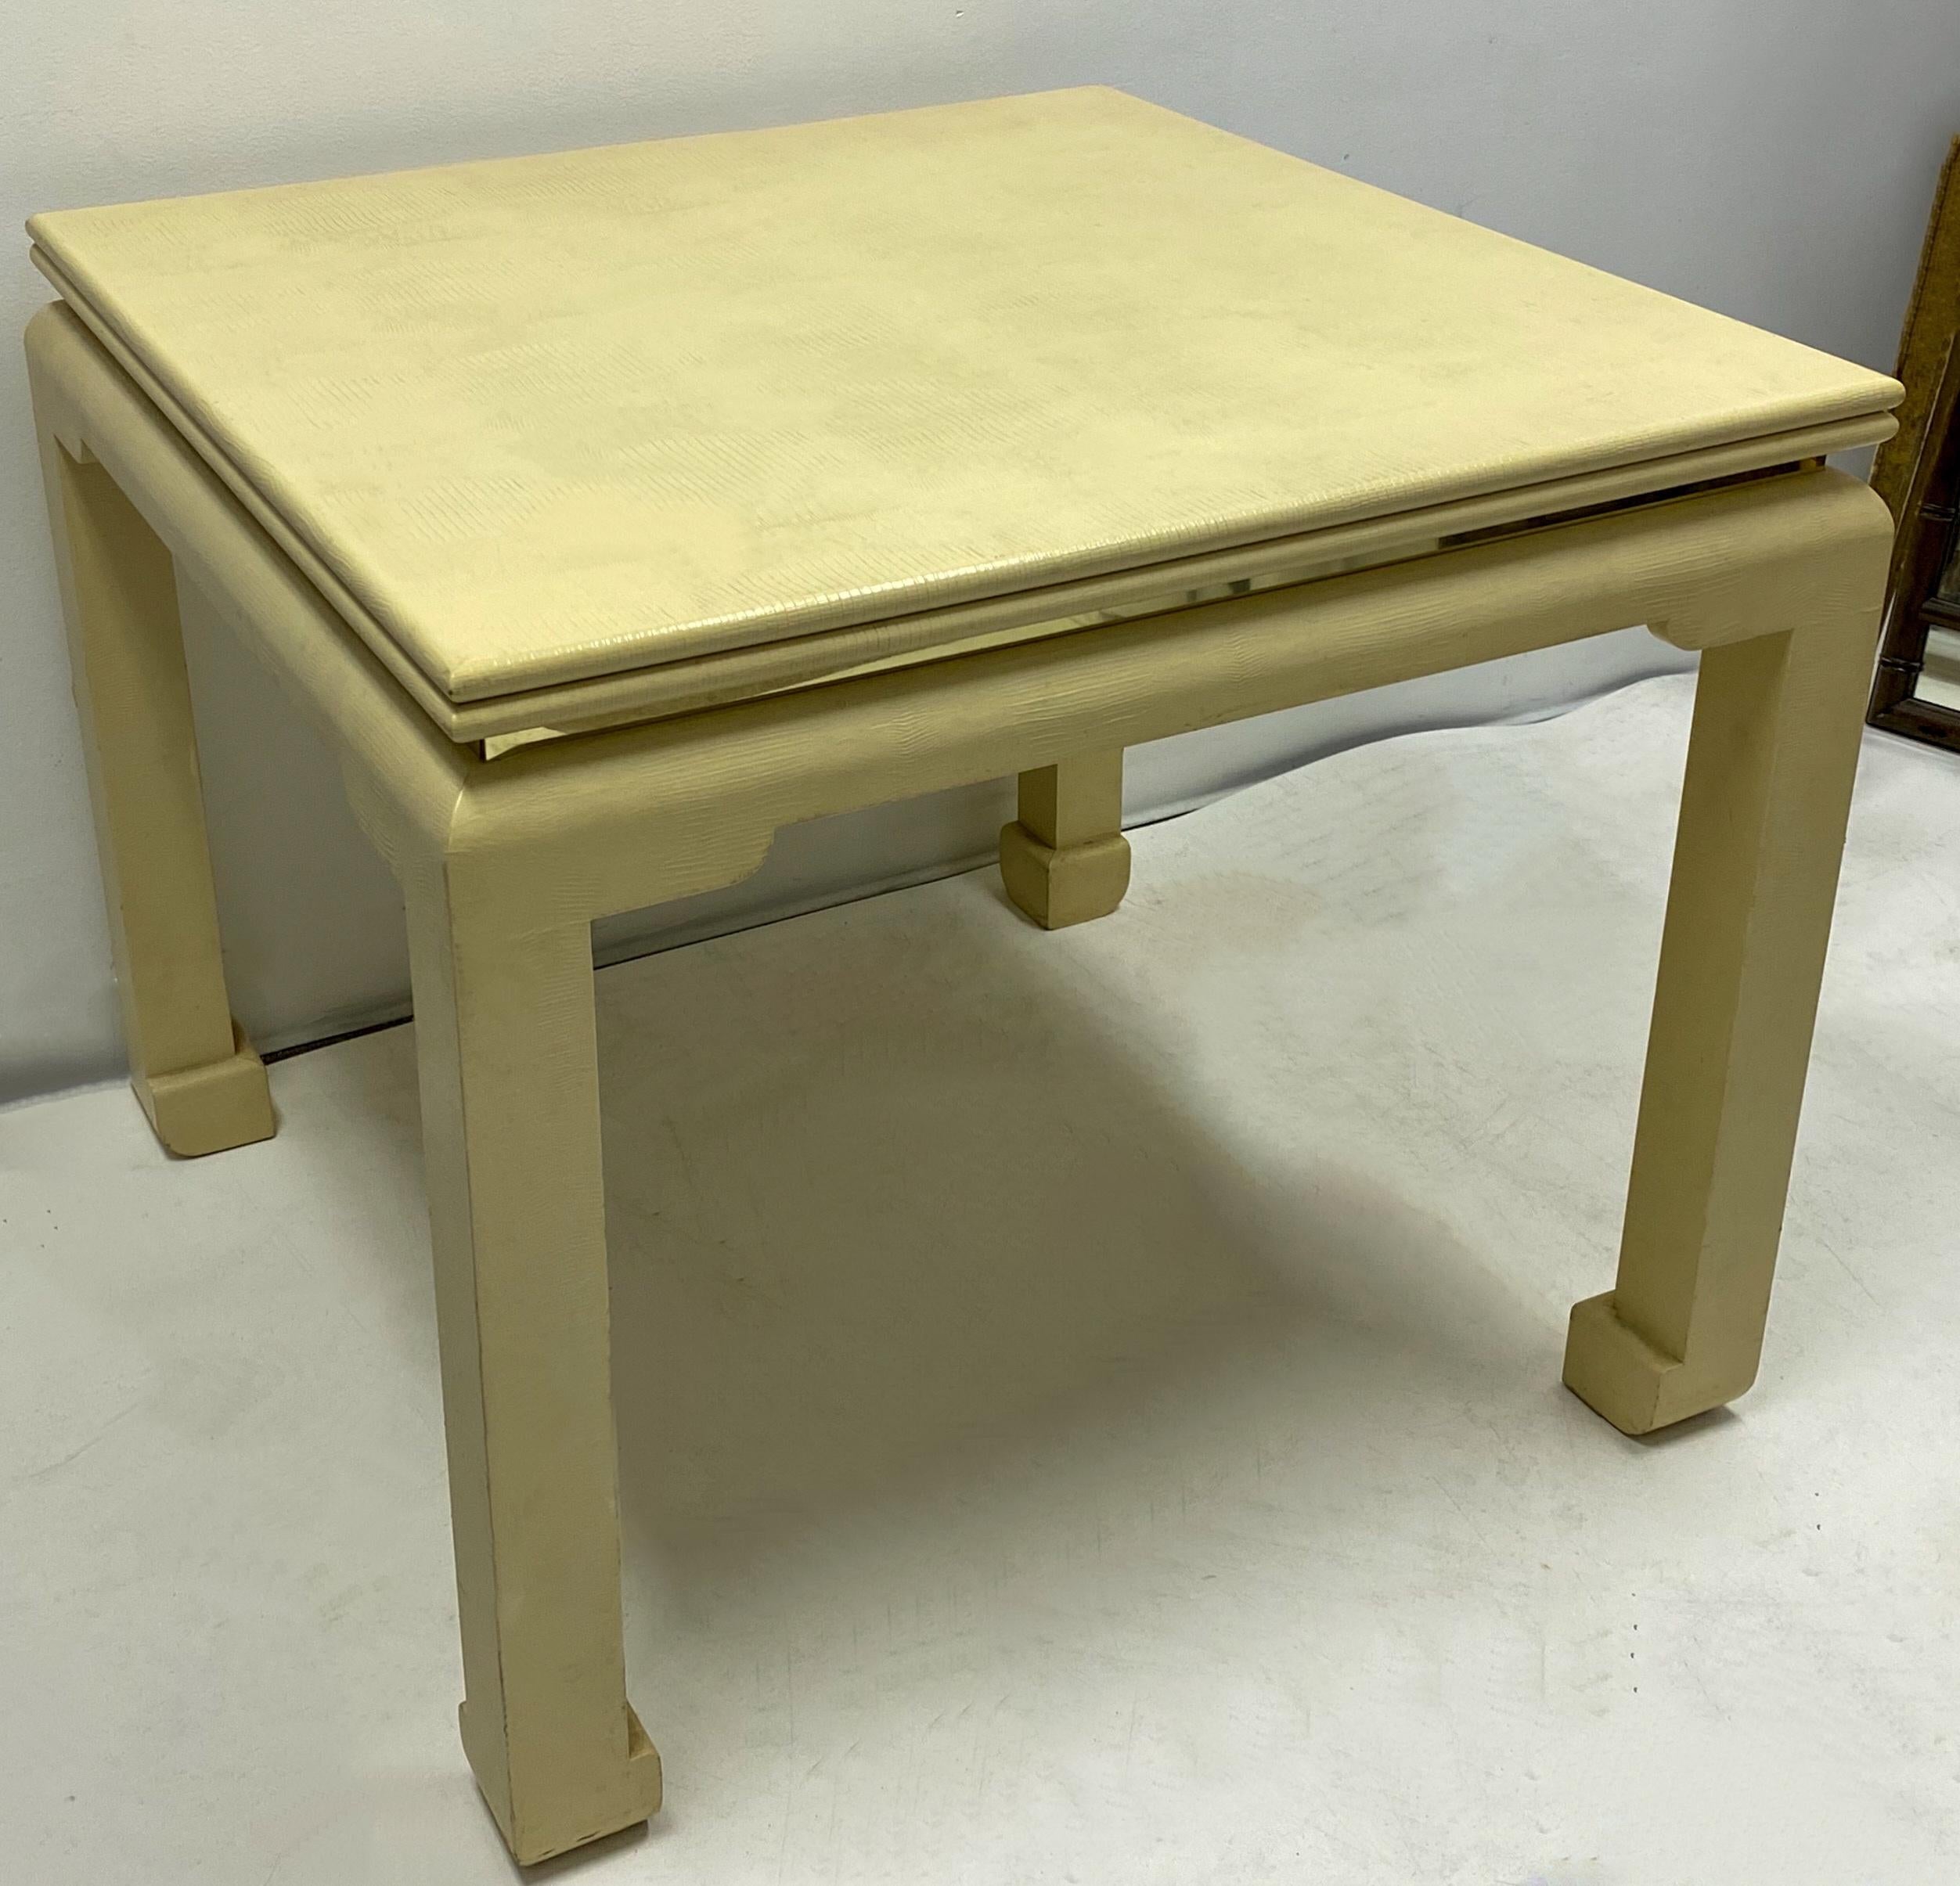 This is a Mid-Century Modern lacquered goatskin wrapped game table that converts to a dining table and is attributed to designer Karl Springer. The table also has a brass band that wraps around the entire piece. It is in the original color and very